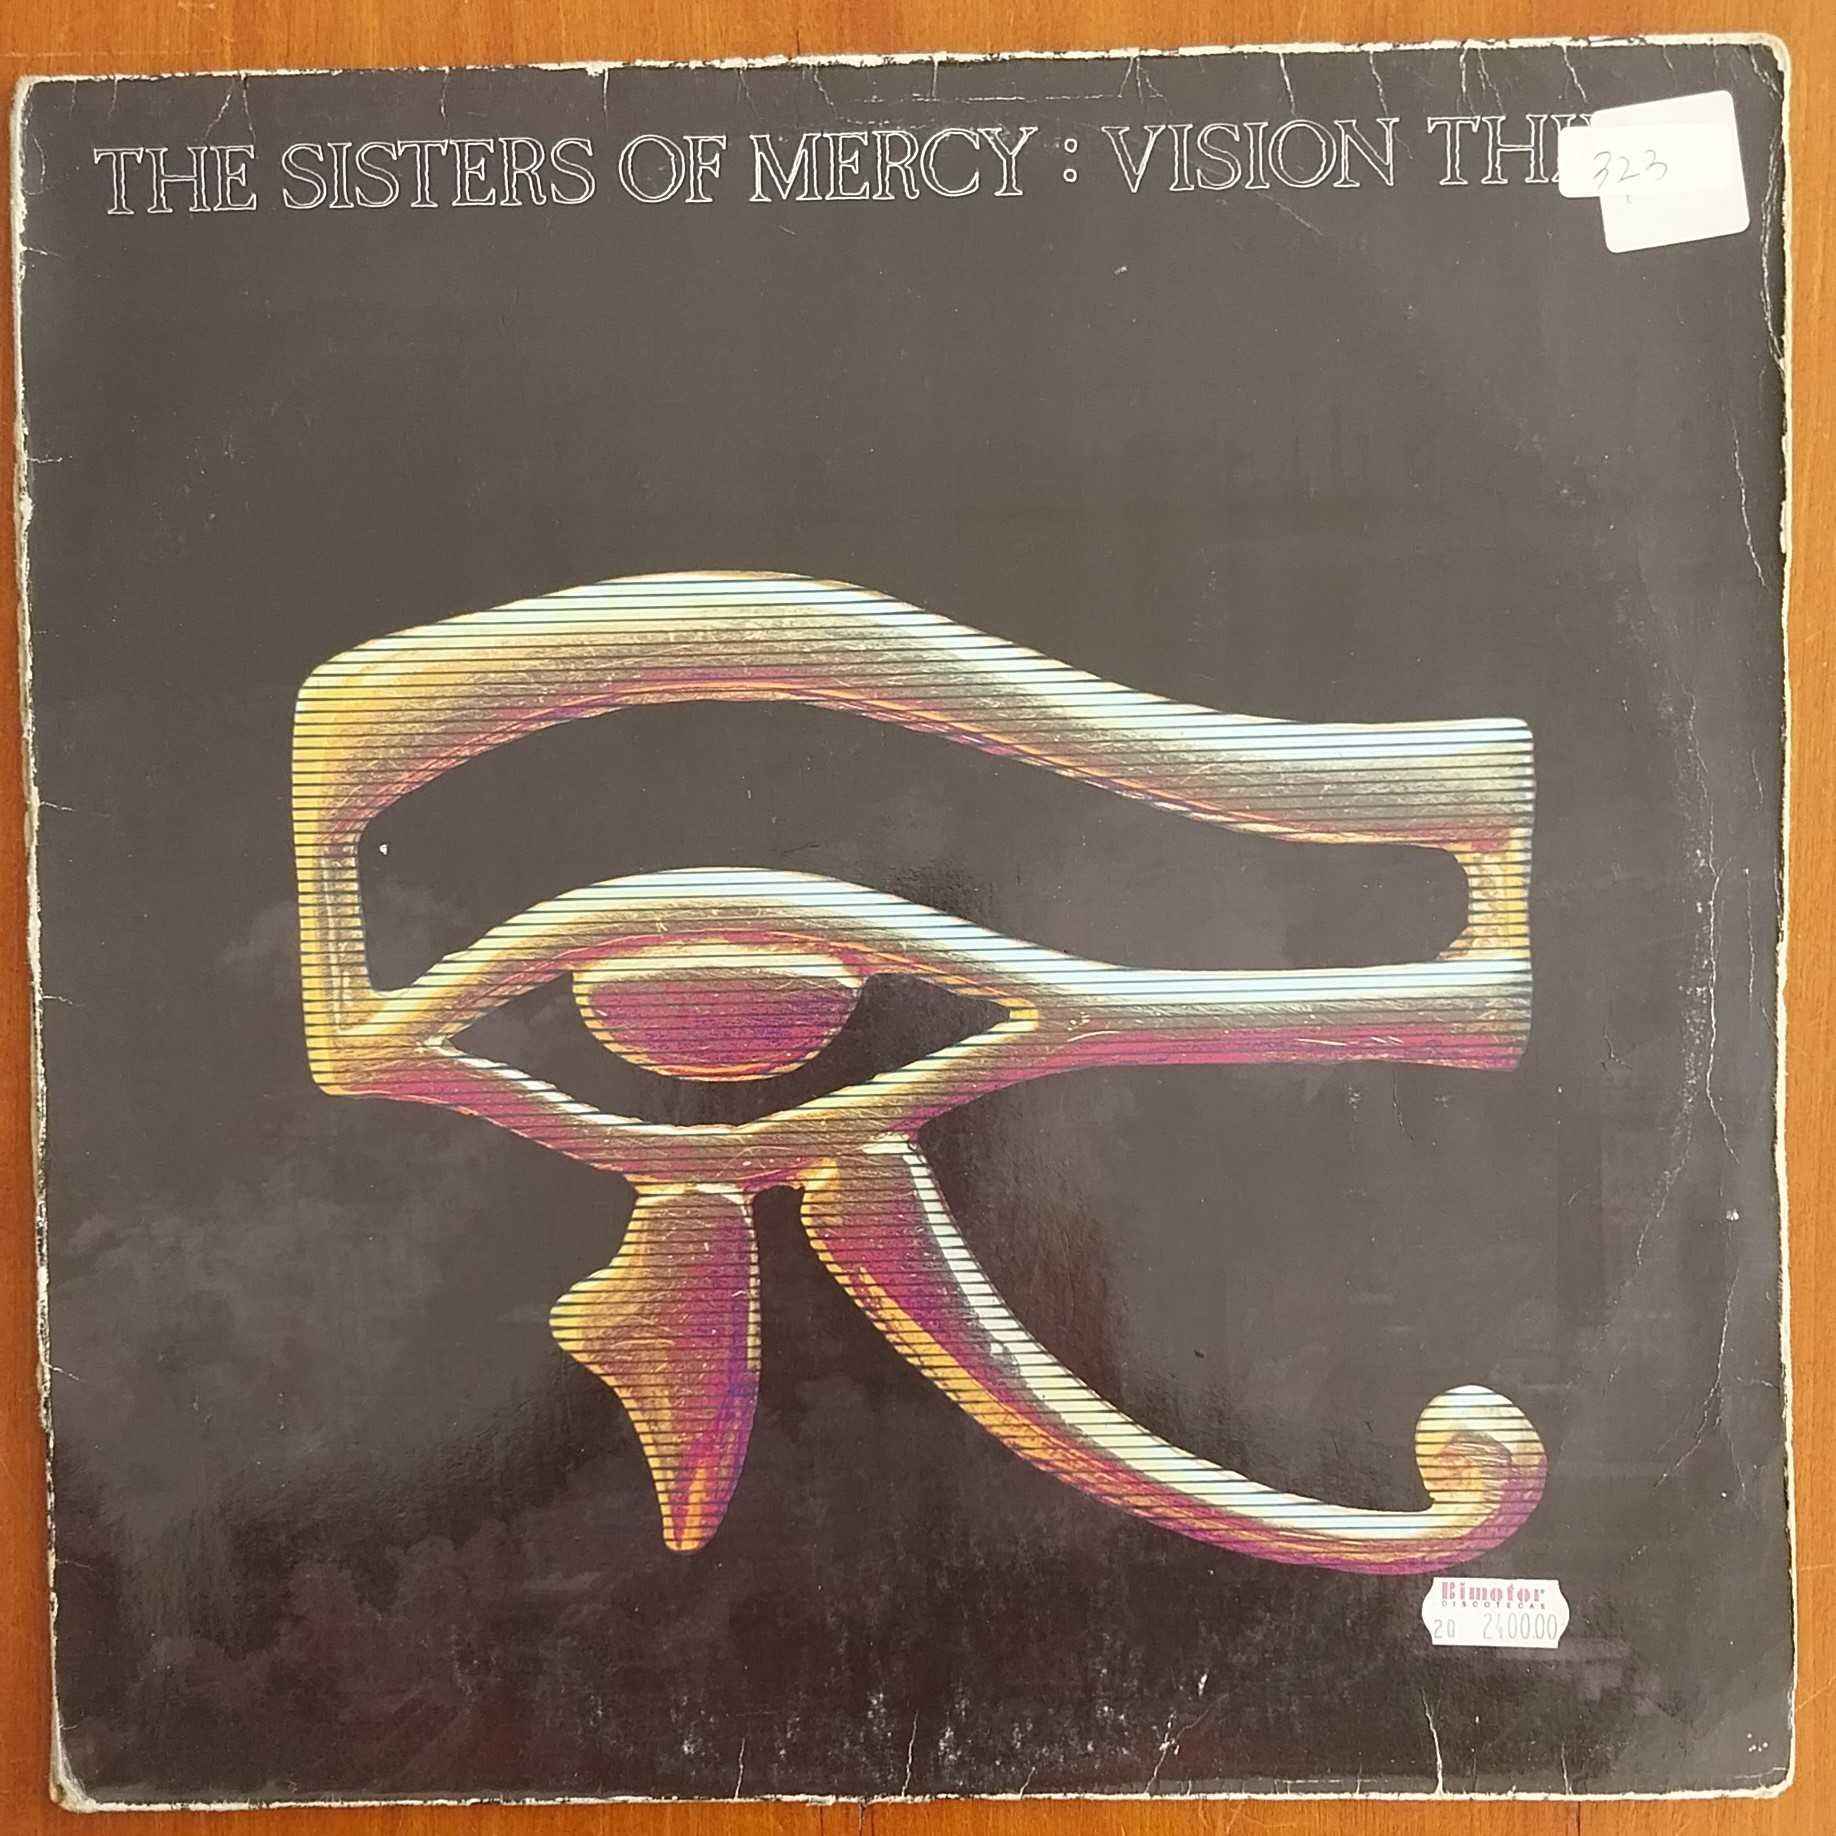 vinil: The Sisters of Mercy “Vision thing”